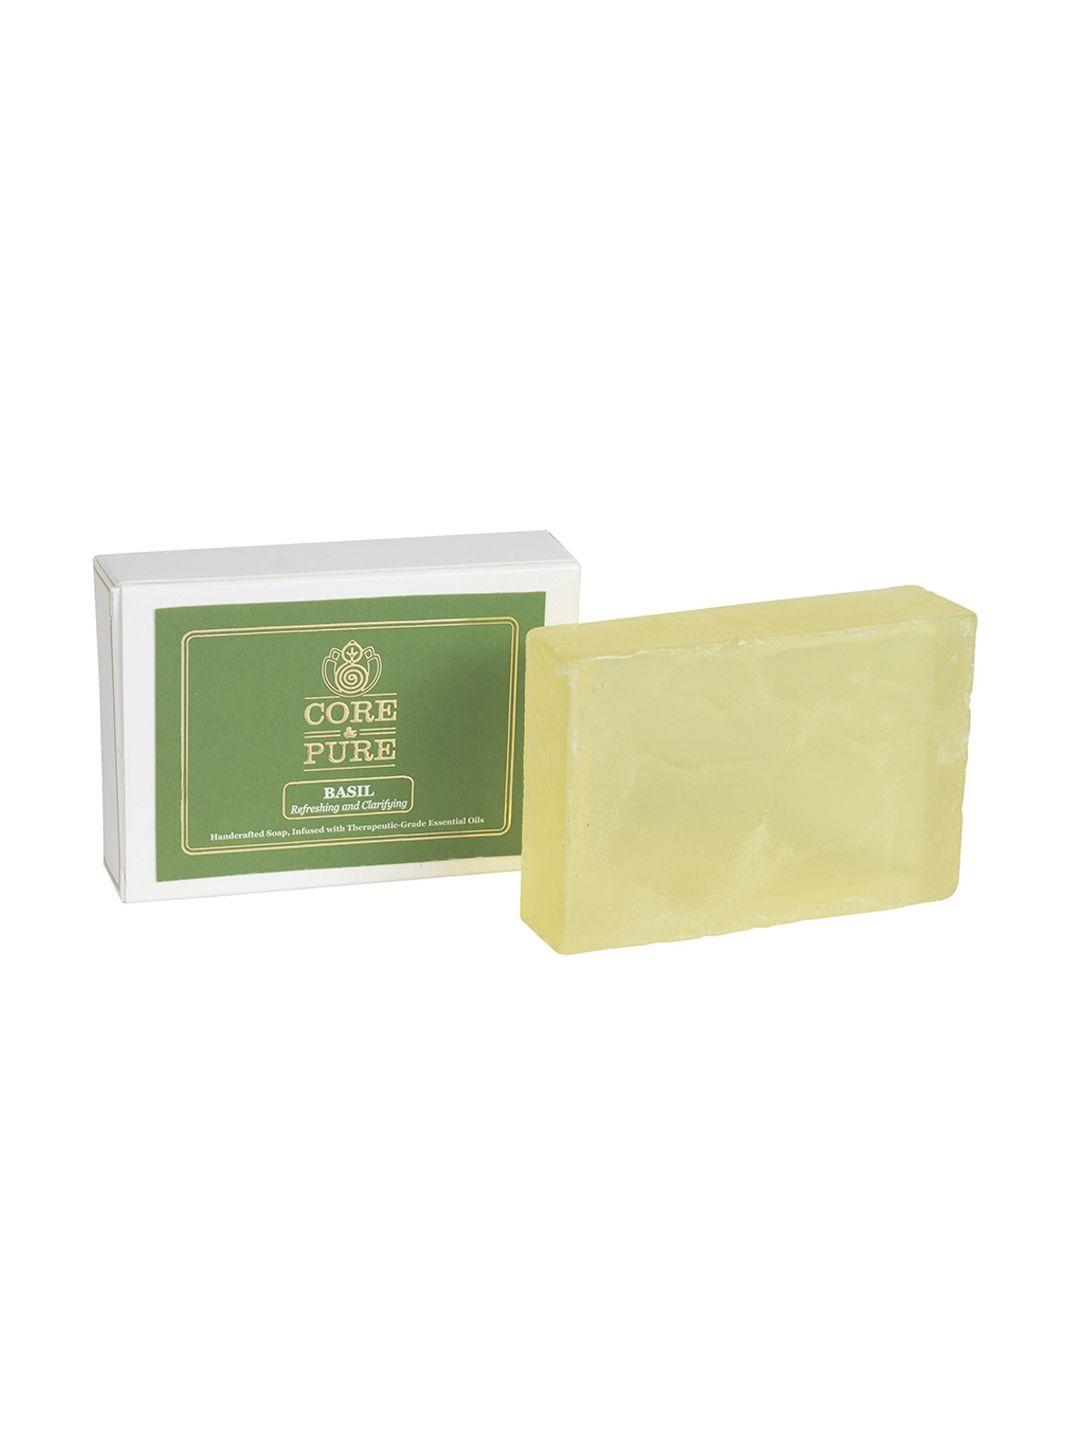 core & pure refreshing and clarifying basil soap 100 g